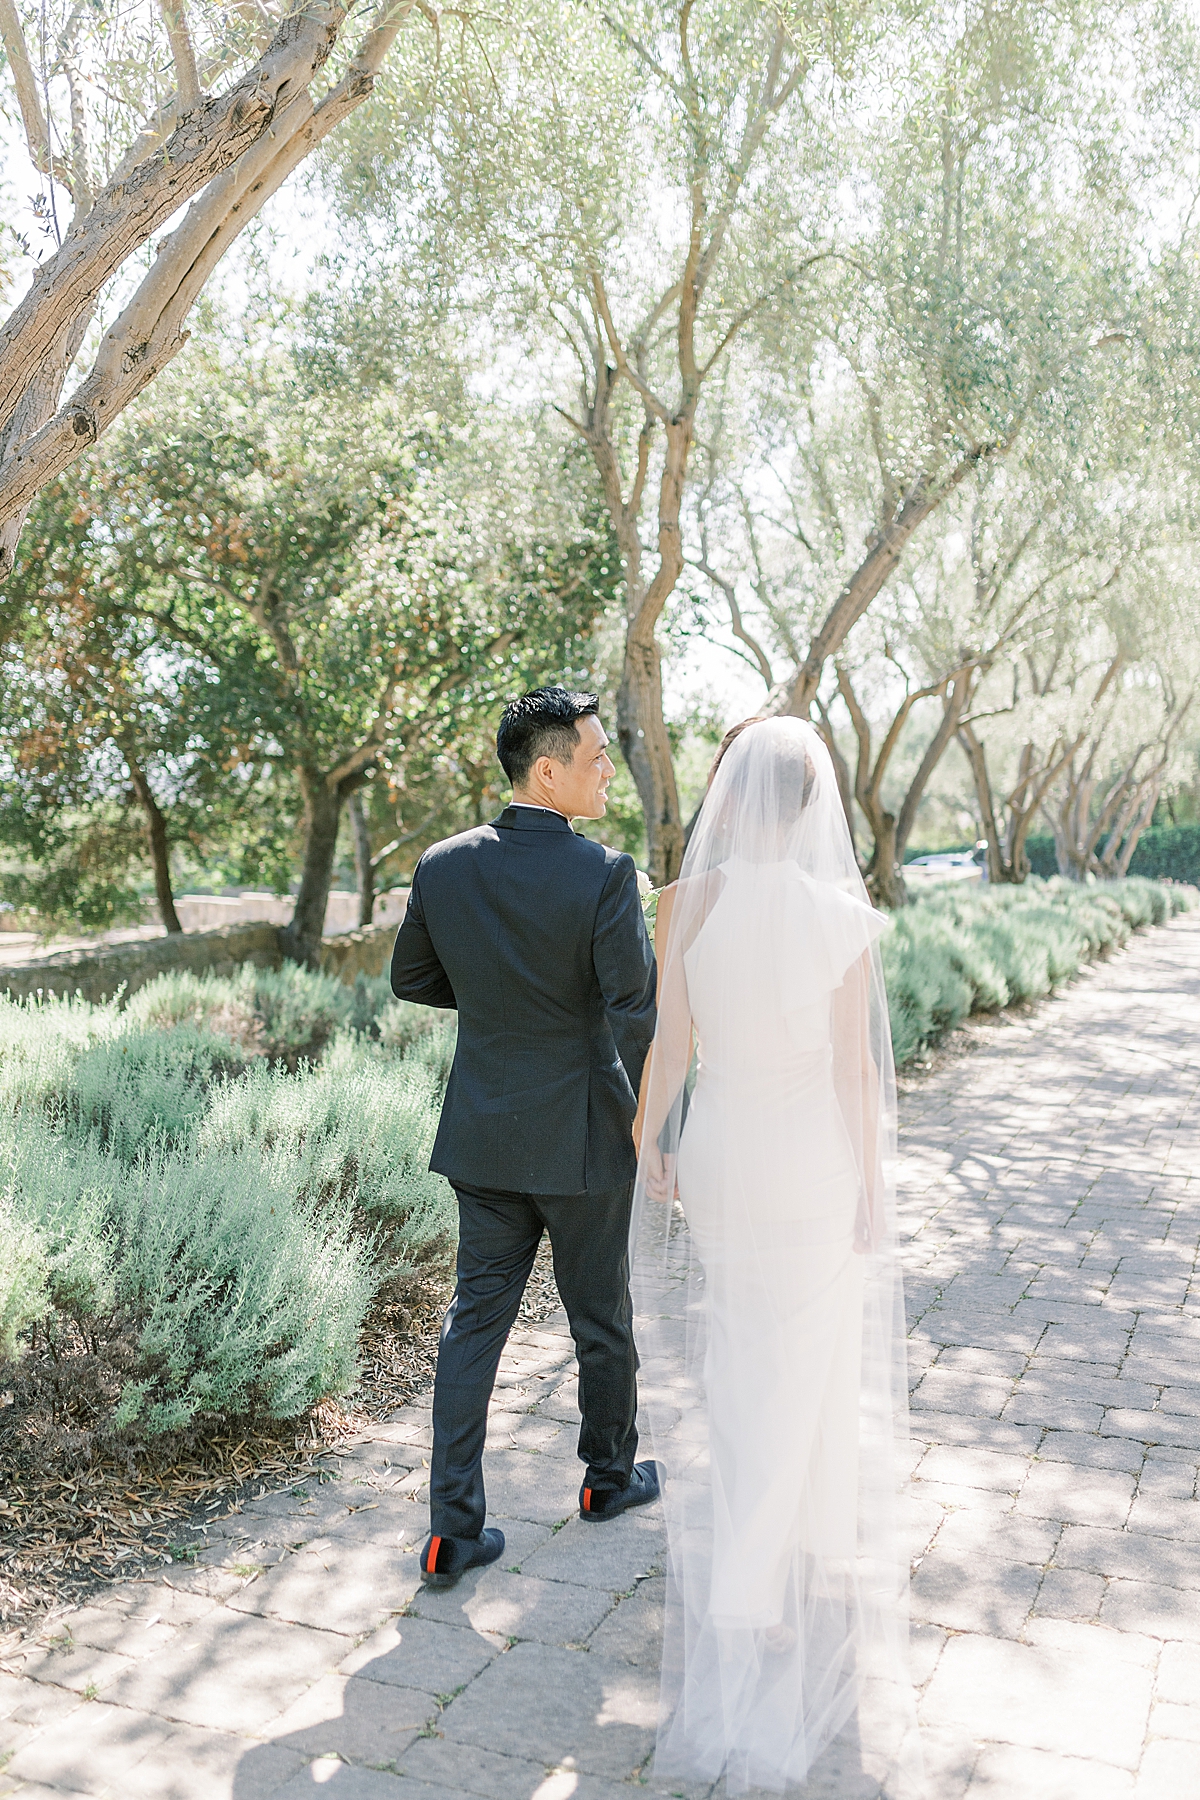 The couple holding hands and walking away down a path lined with olive trees at the San Ysidro Ranch after their Montecito Church Wedding